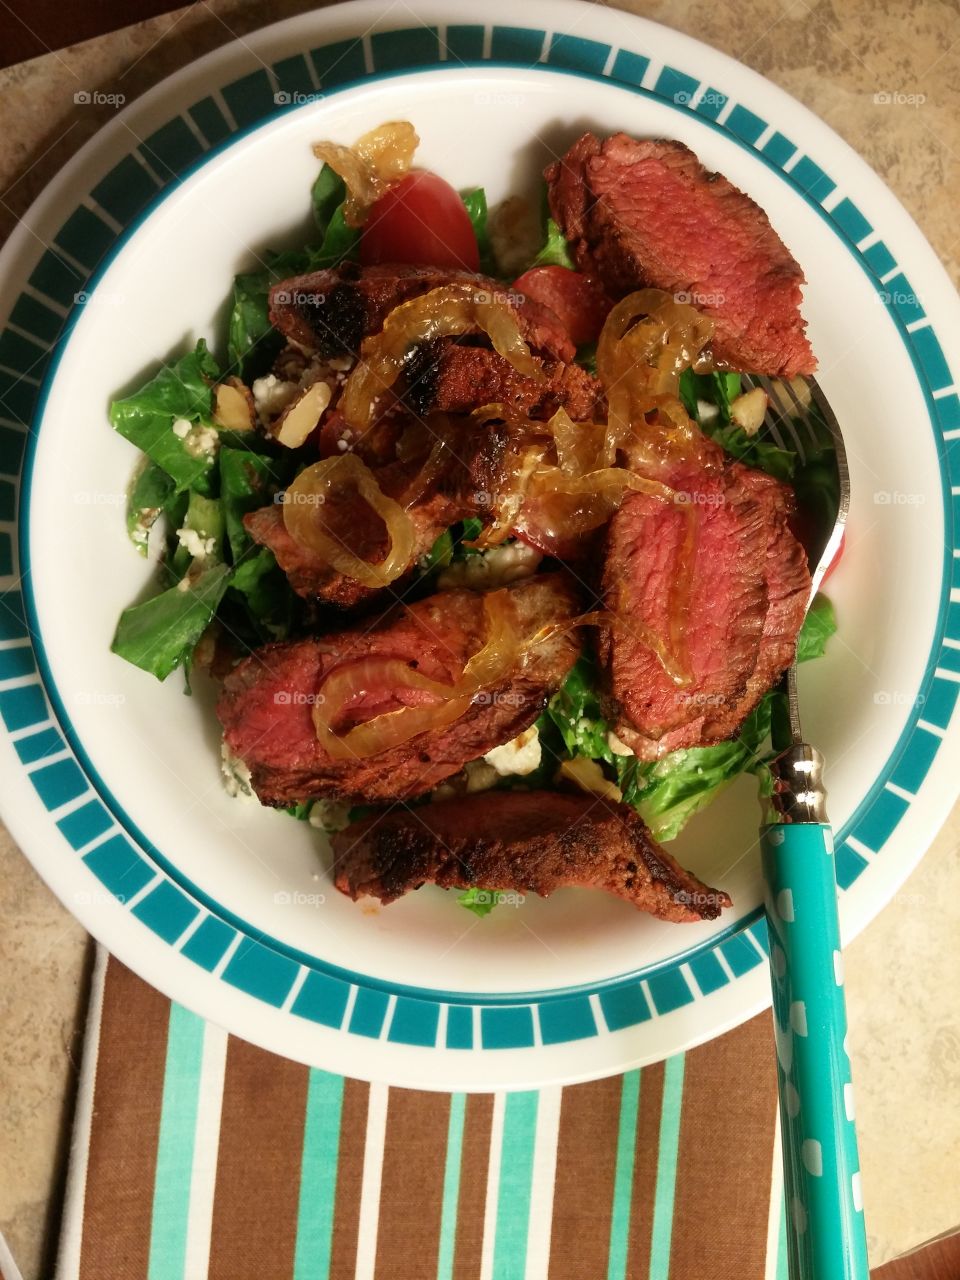 steak salad with bleu cheese and caramelized onions